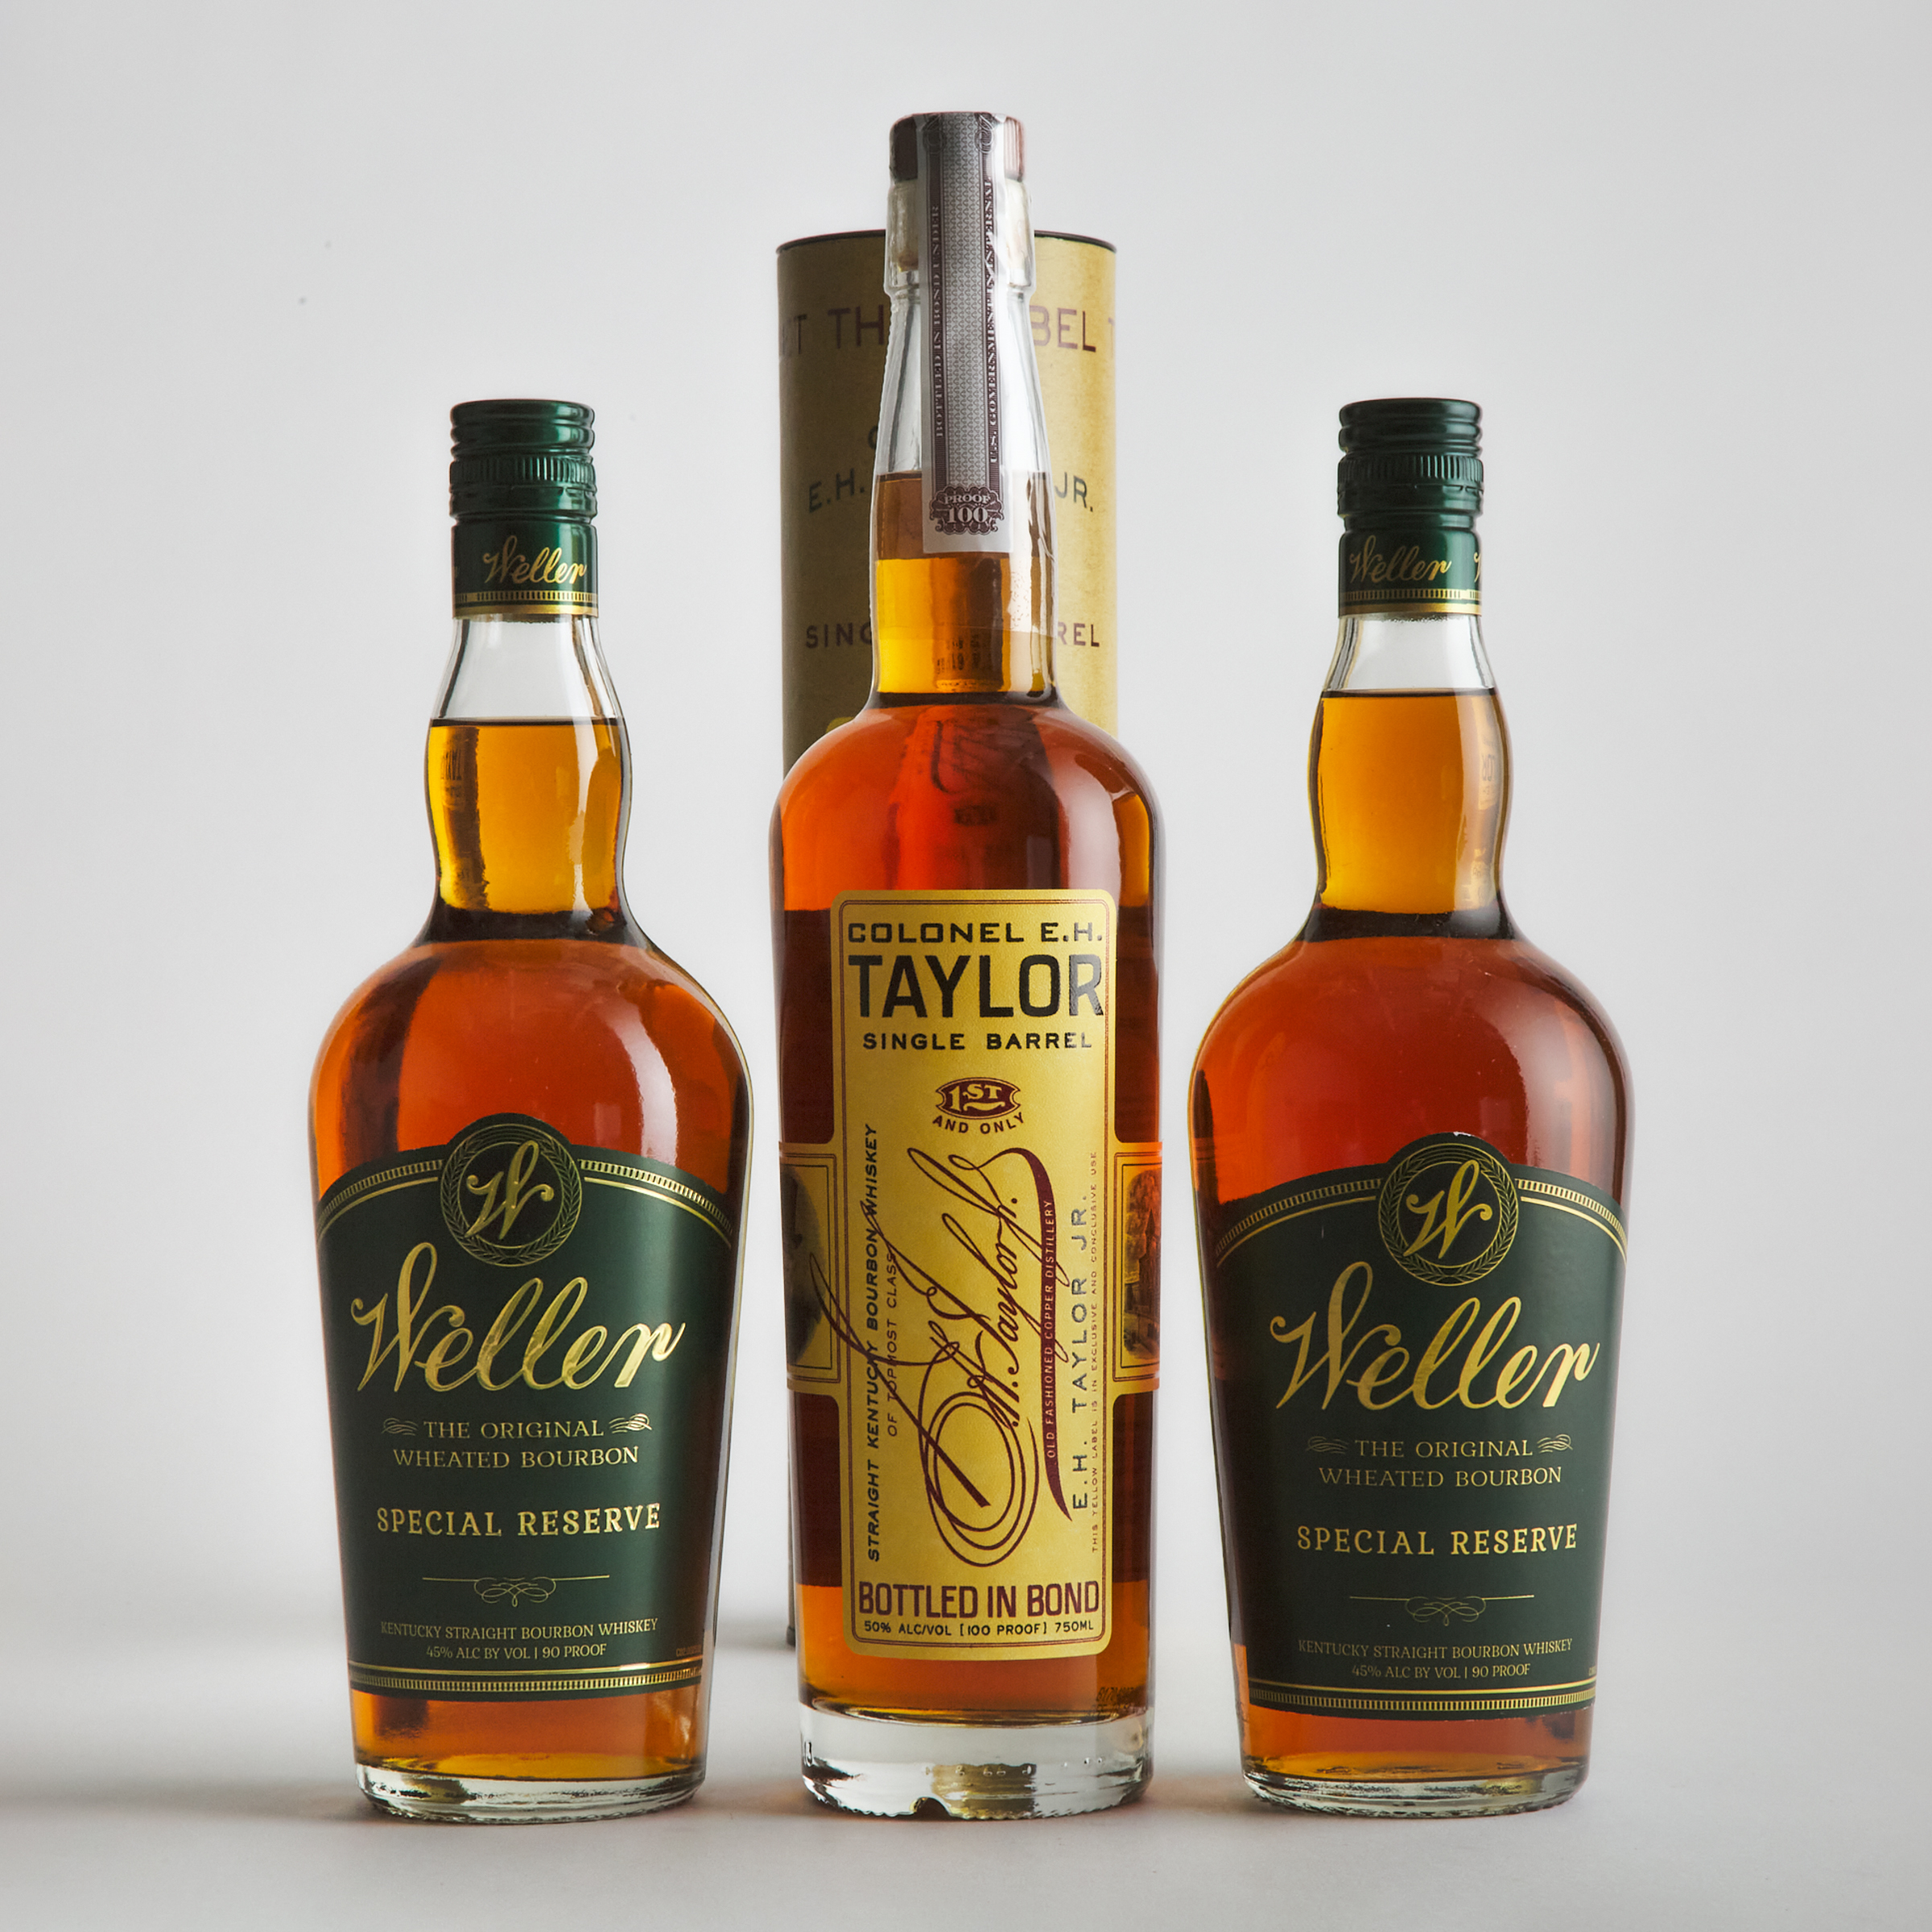 COLONEL E. H.TAYLOR JR. SINGLE BARREL STRAIGHT KENTUCKY BOURBON WHISKEY (ONE 750 ML)
WELLER SPECIAL RESERVE BOURBON WHISKEY NAS (TWO 750 ML)